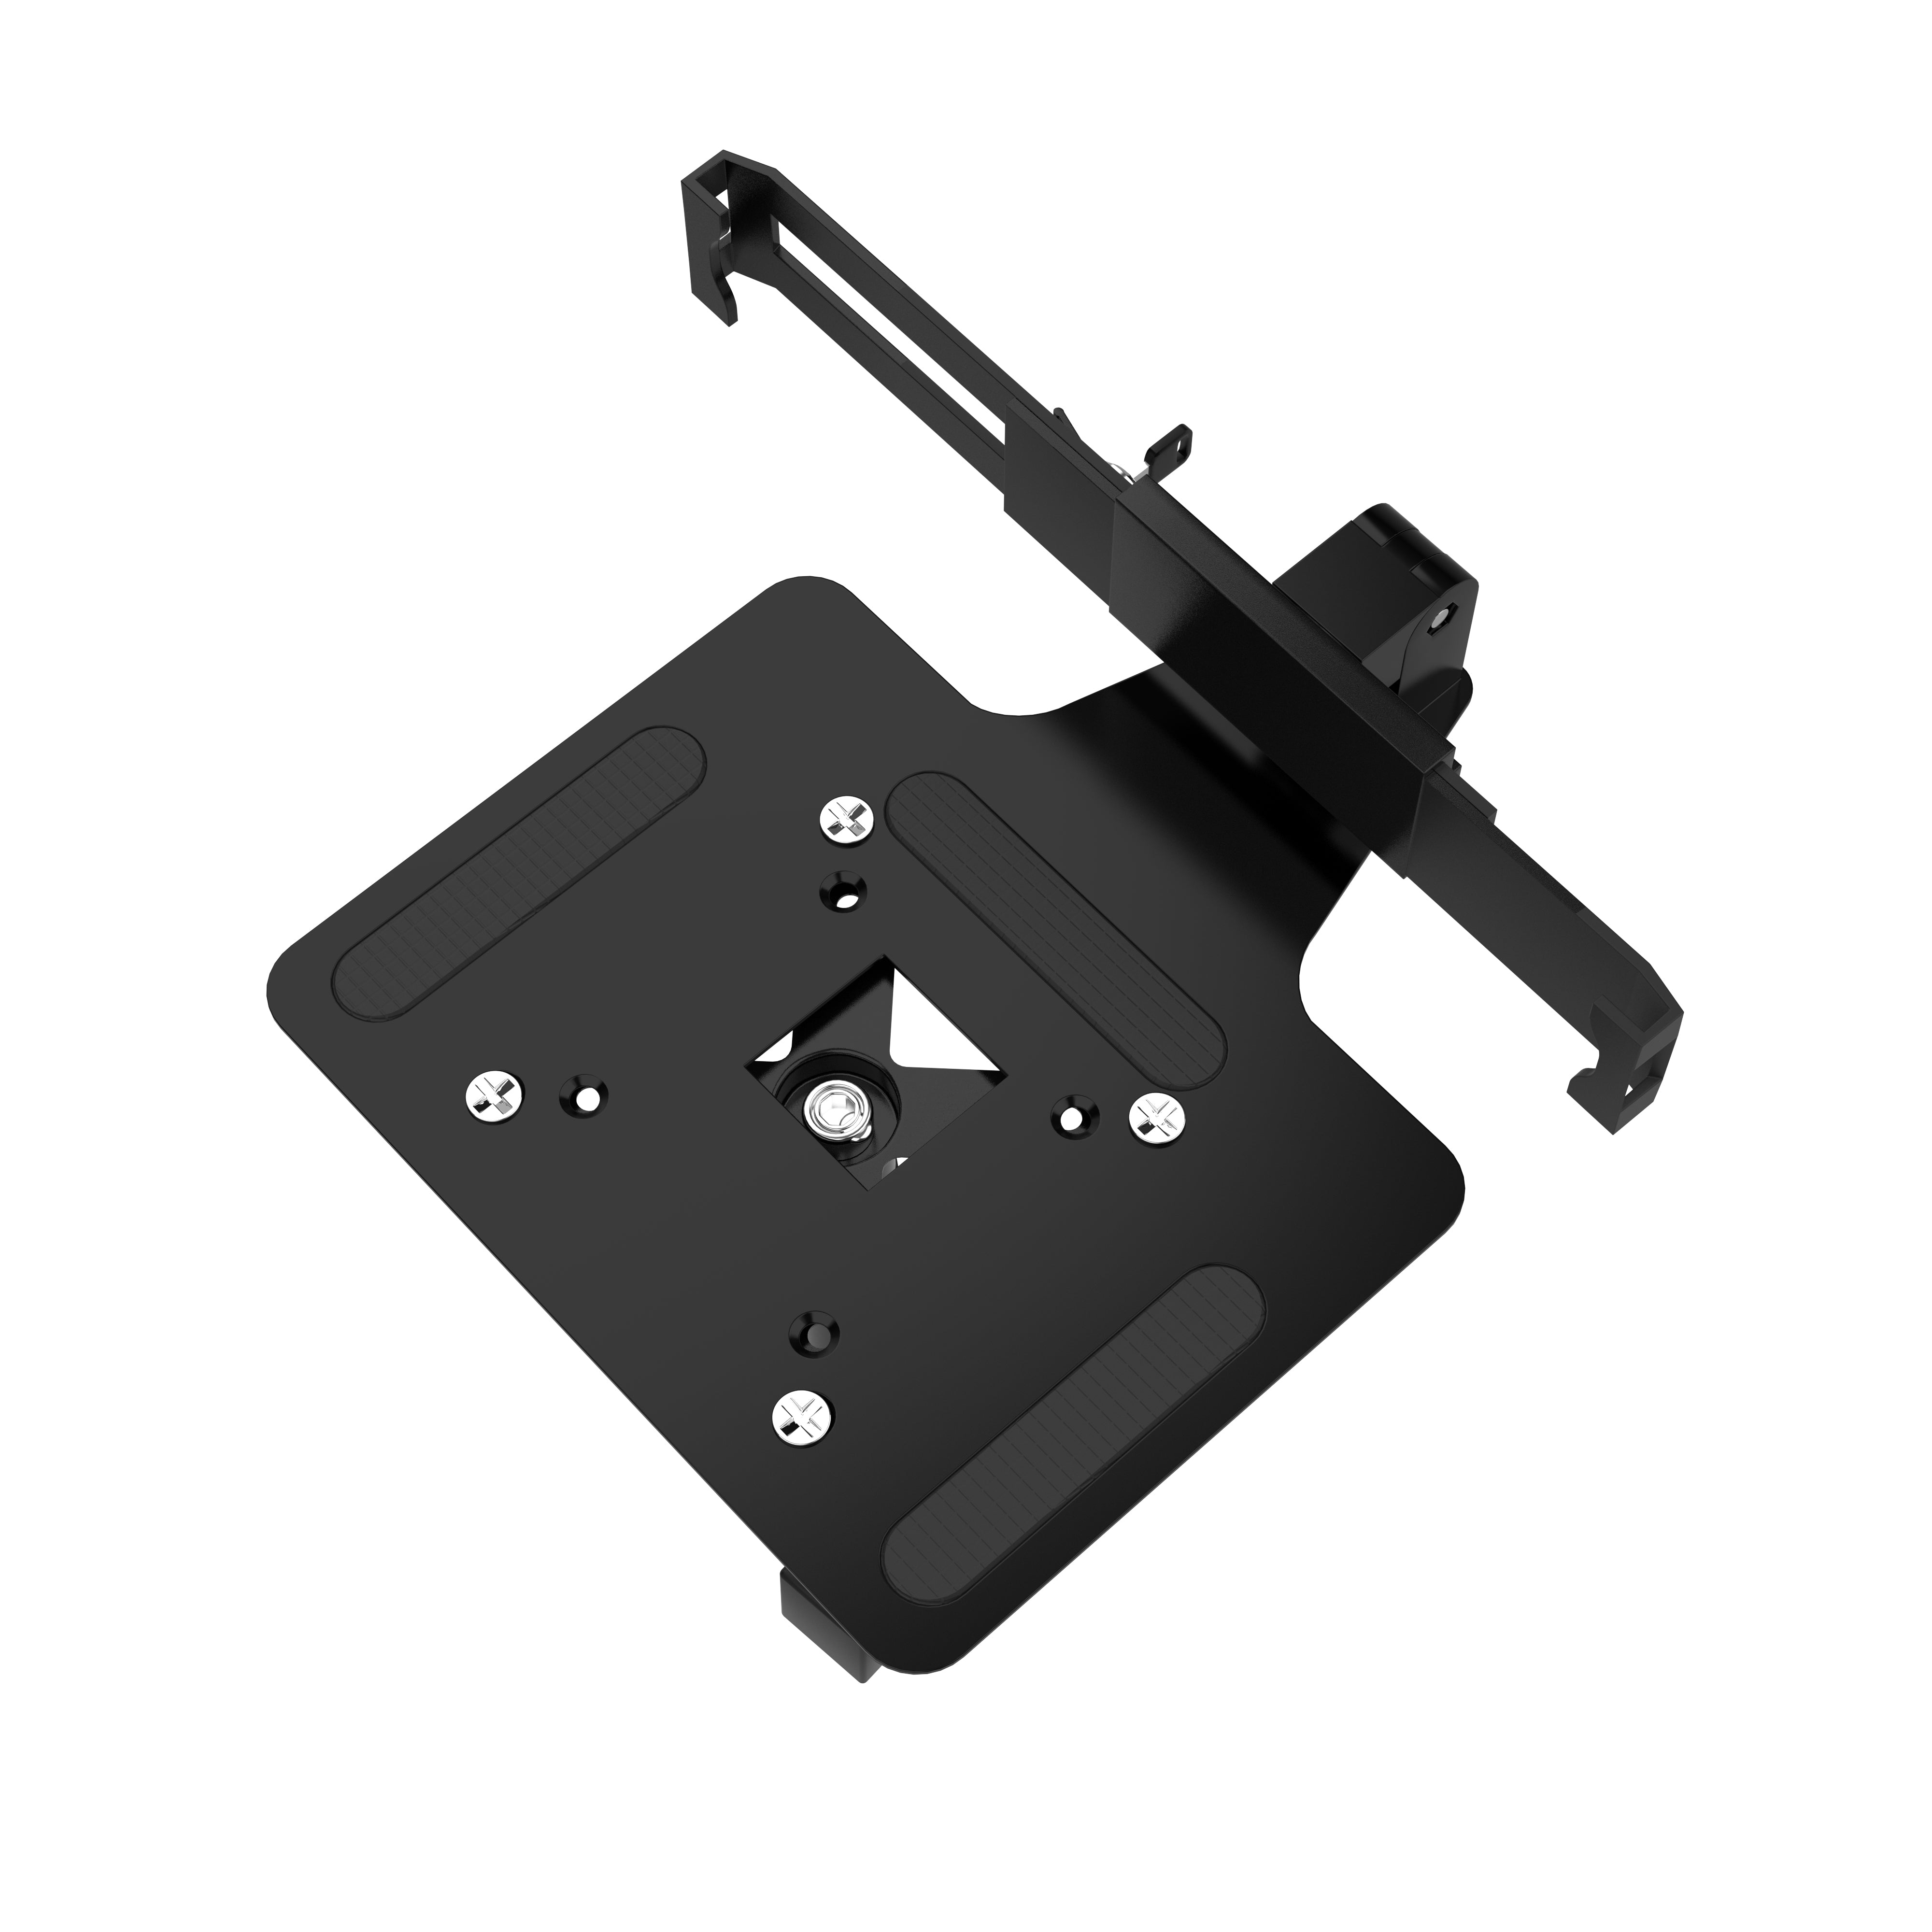 Laptop Security Arm with VESA Mounting Base